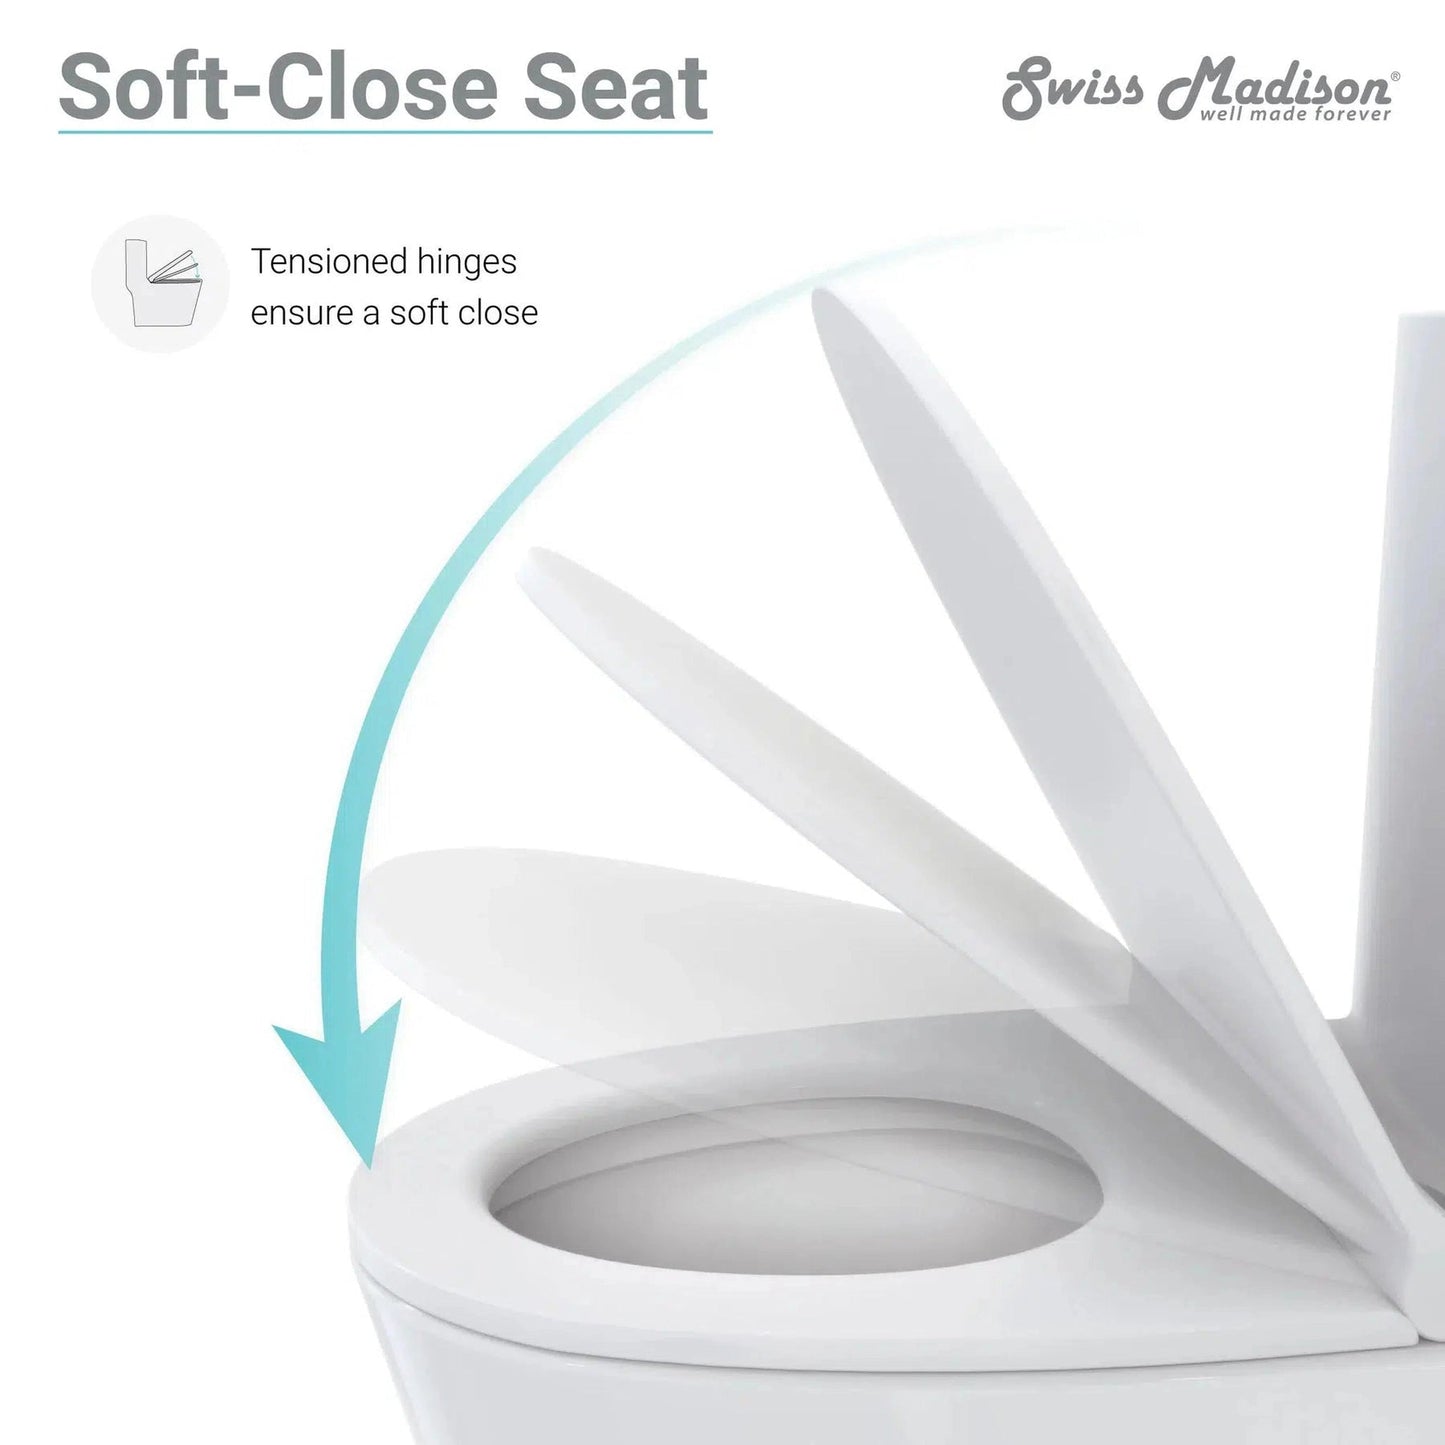 Swiss Madison Caché 16" x 30" Two-Piece White Elongated Floor-Mounted Toilet With 1.1/1.6 GPF